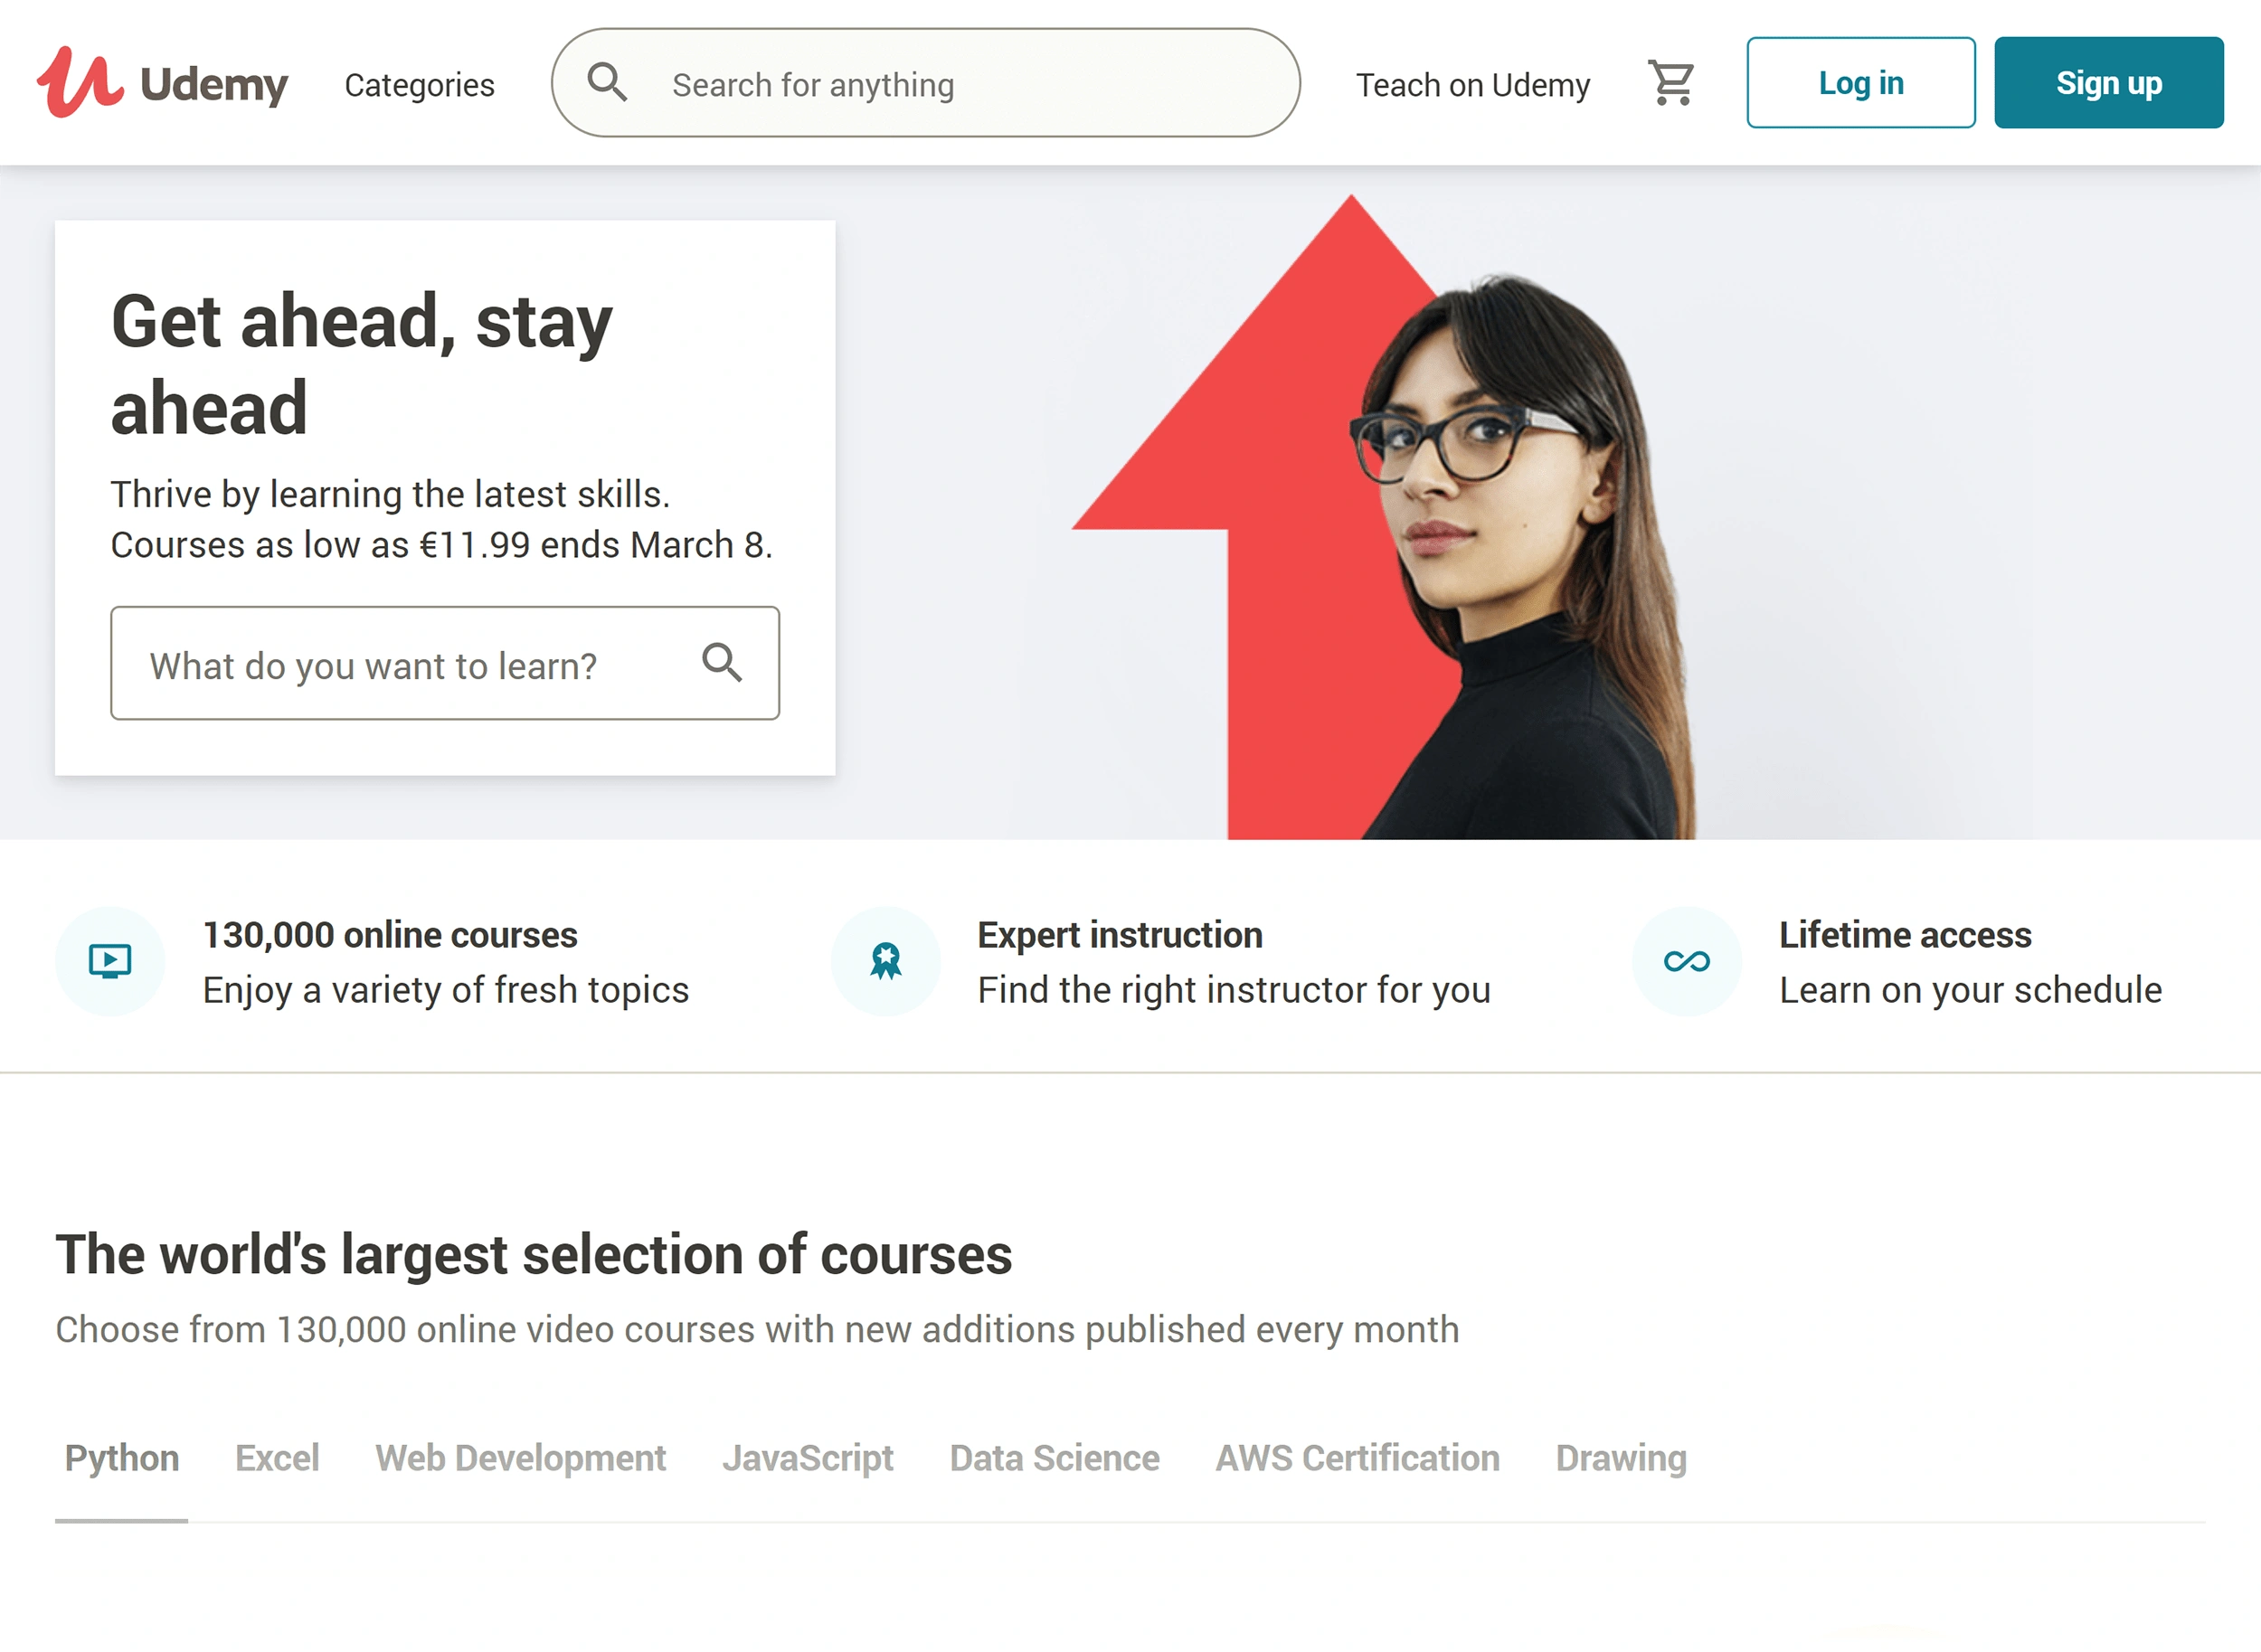 udemy-homepage-min.png